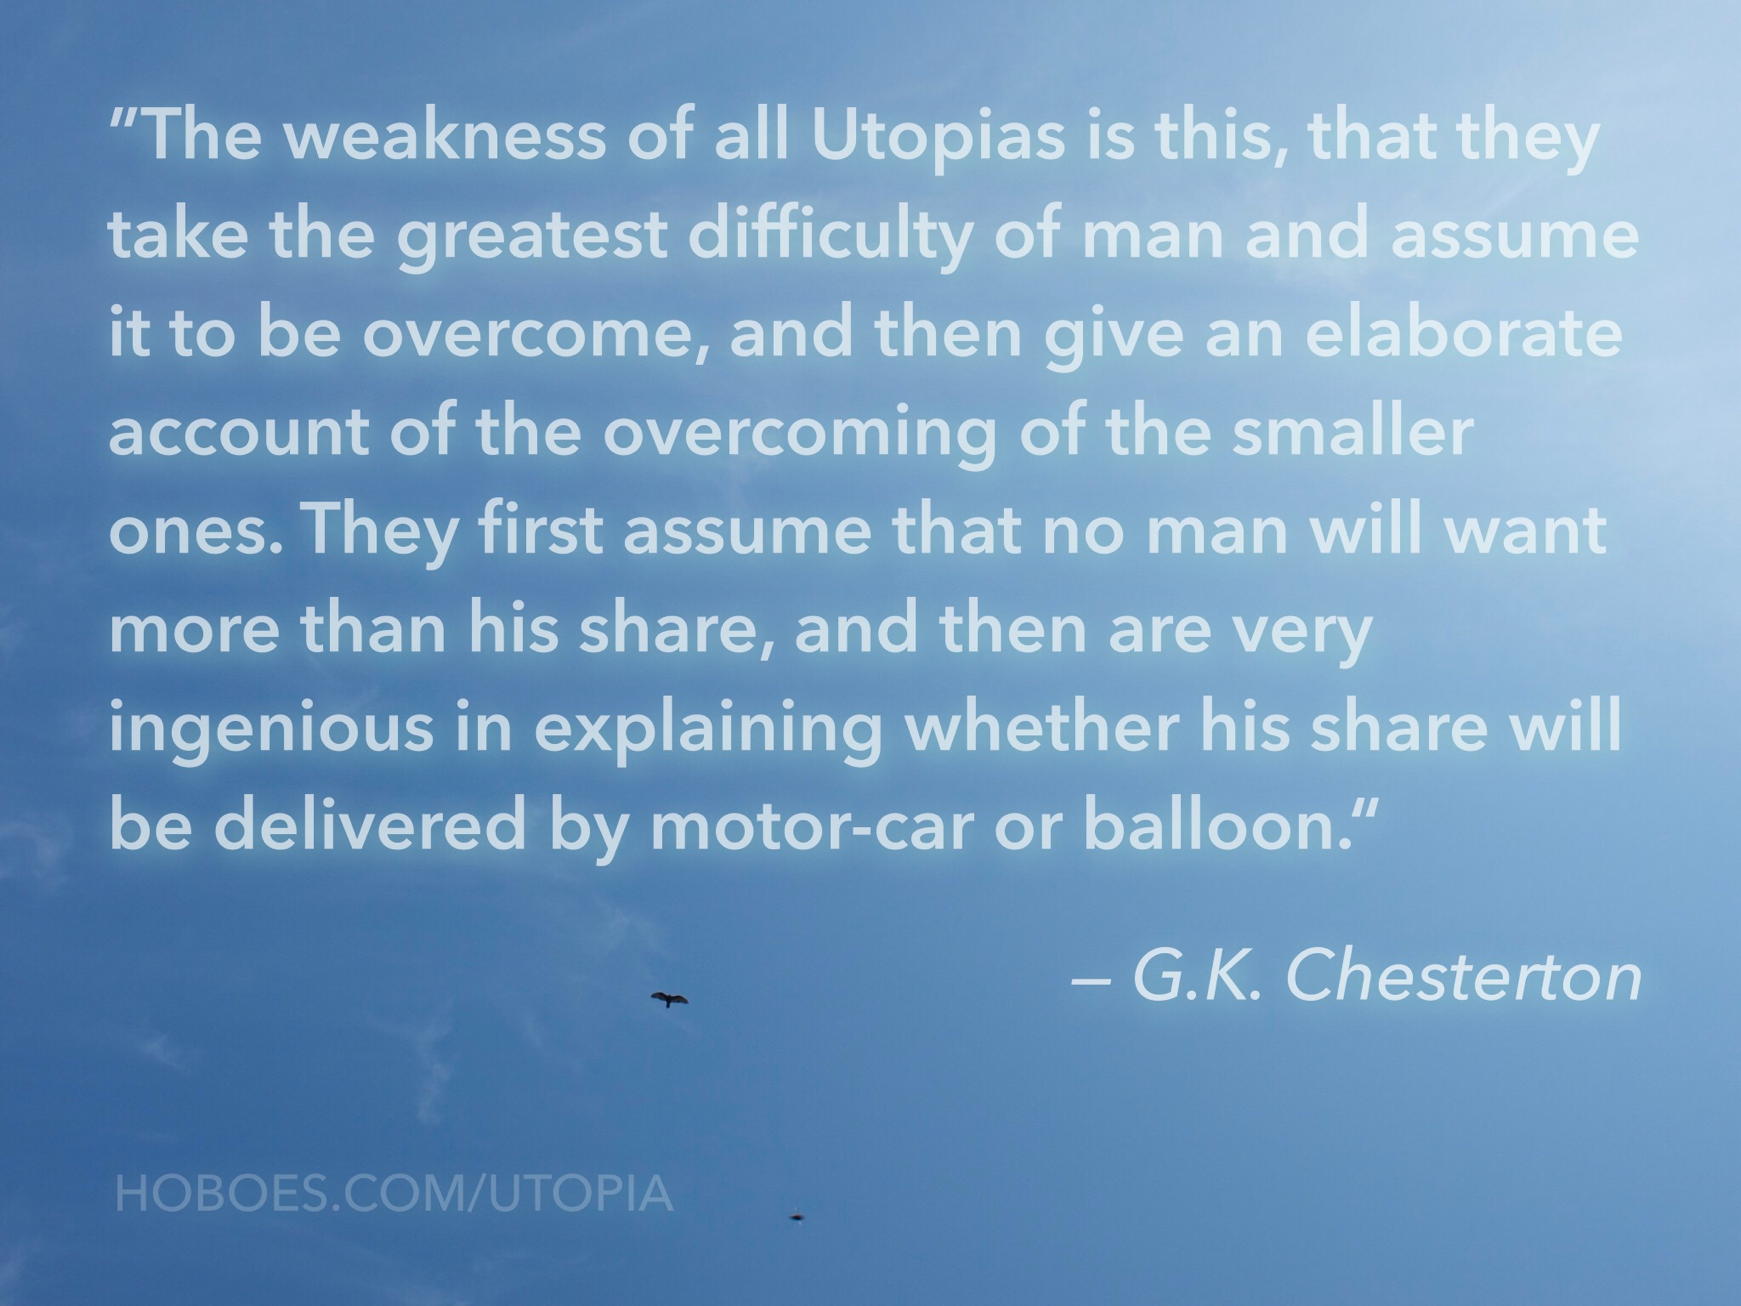 The weakness of all Utopias: Chesterton’s weakness of utopias: they assume the greatest difficulty is overcome, and then fiddle around with ingenious ideas that won’t work.; socialism; utopianism